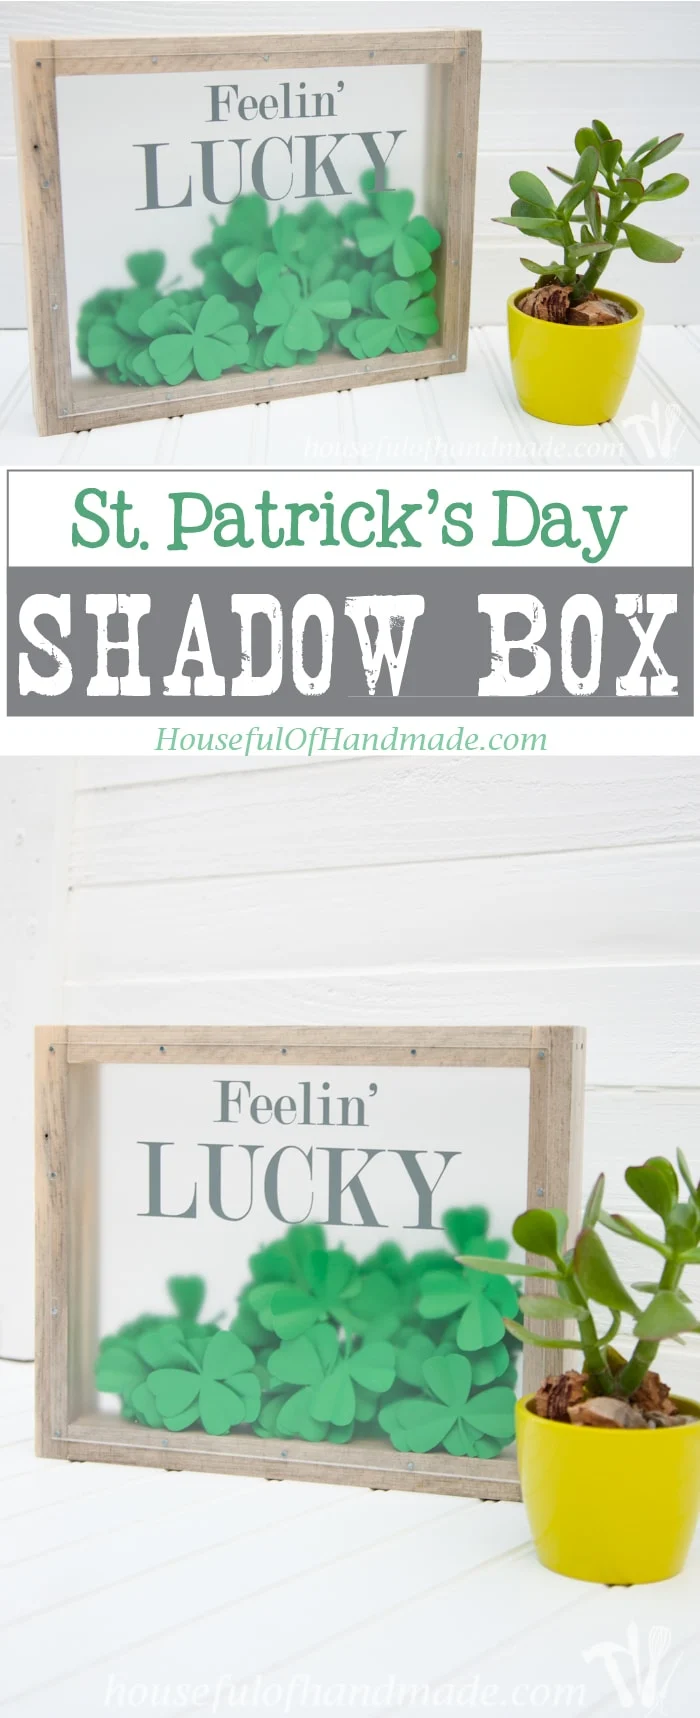 I love this fun St. Patrick's Day shadow box. The perfect way to bring a little green to your decor. | Housefulofhandmade.com